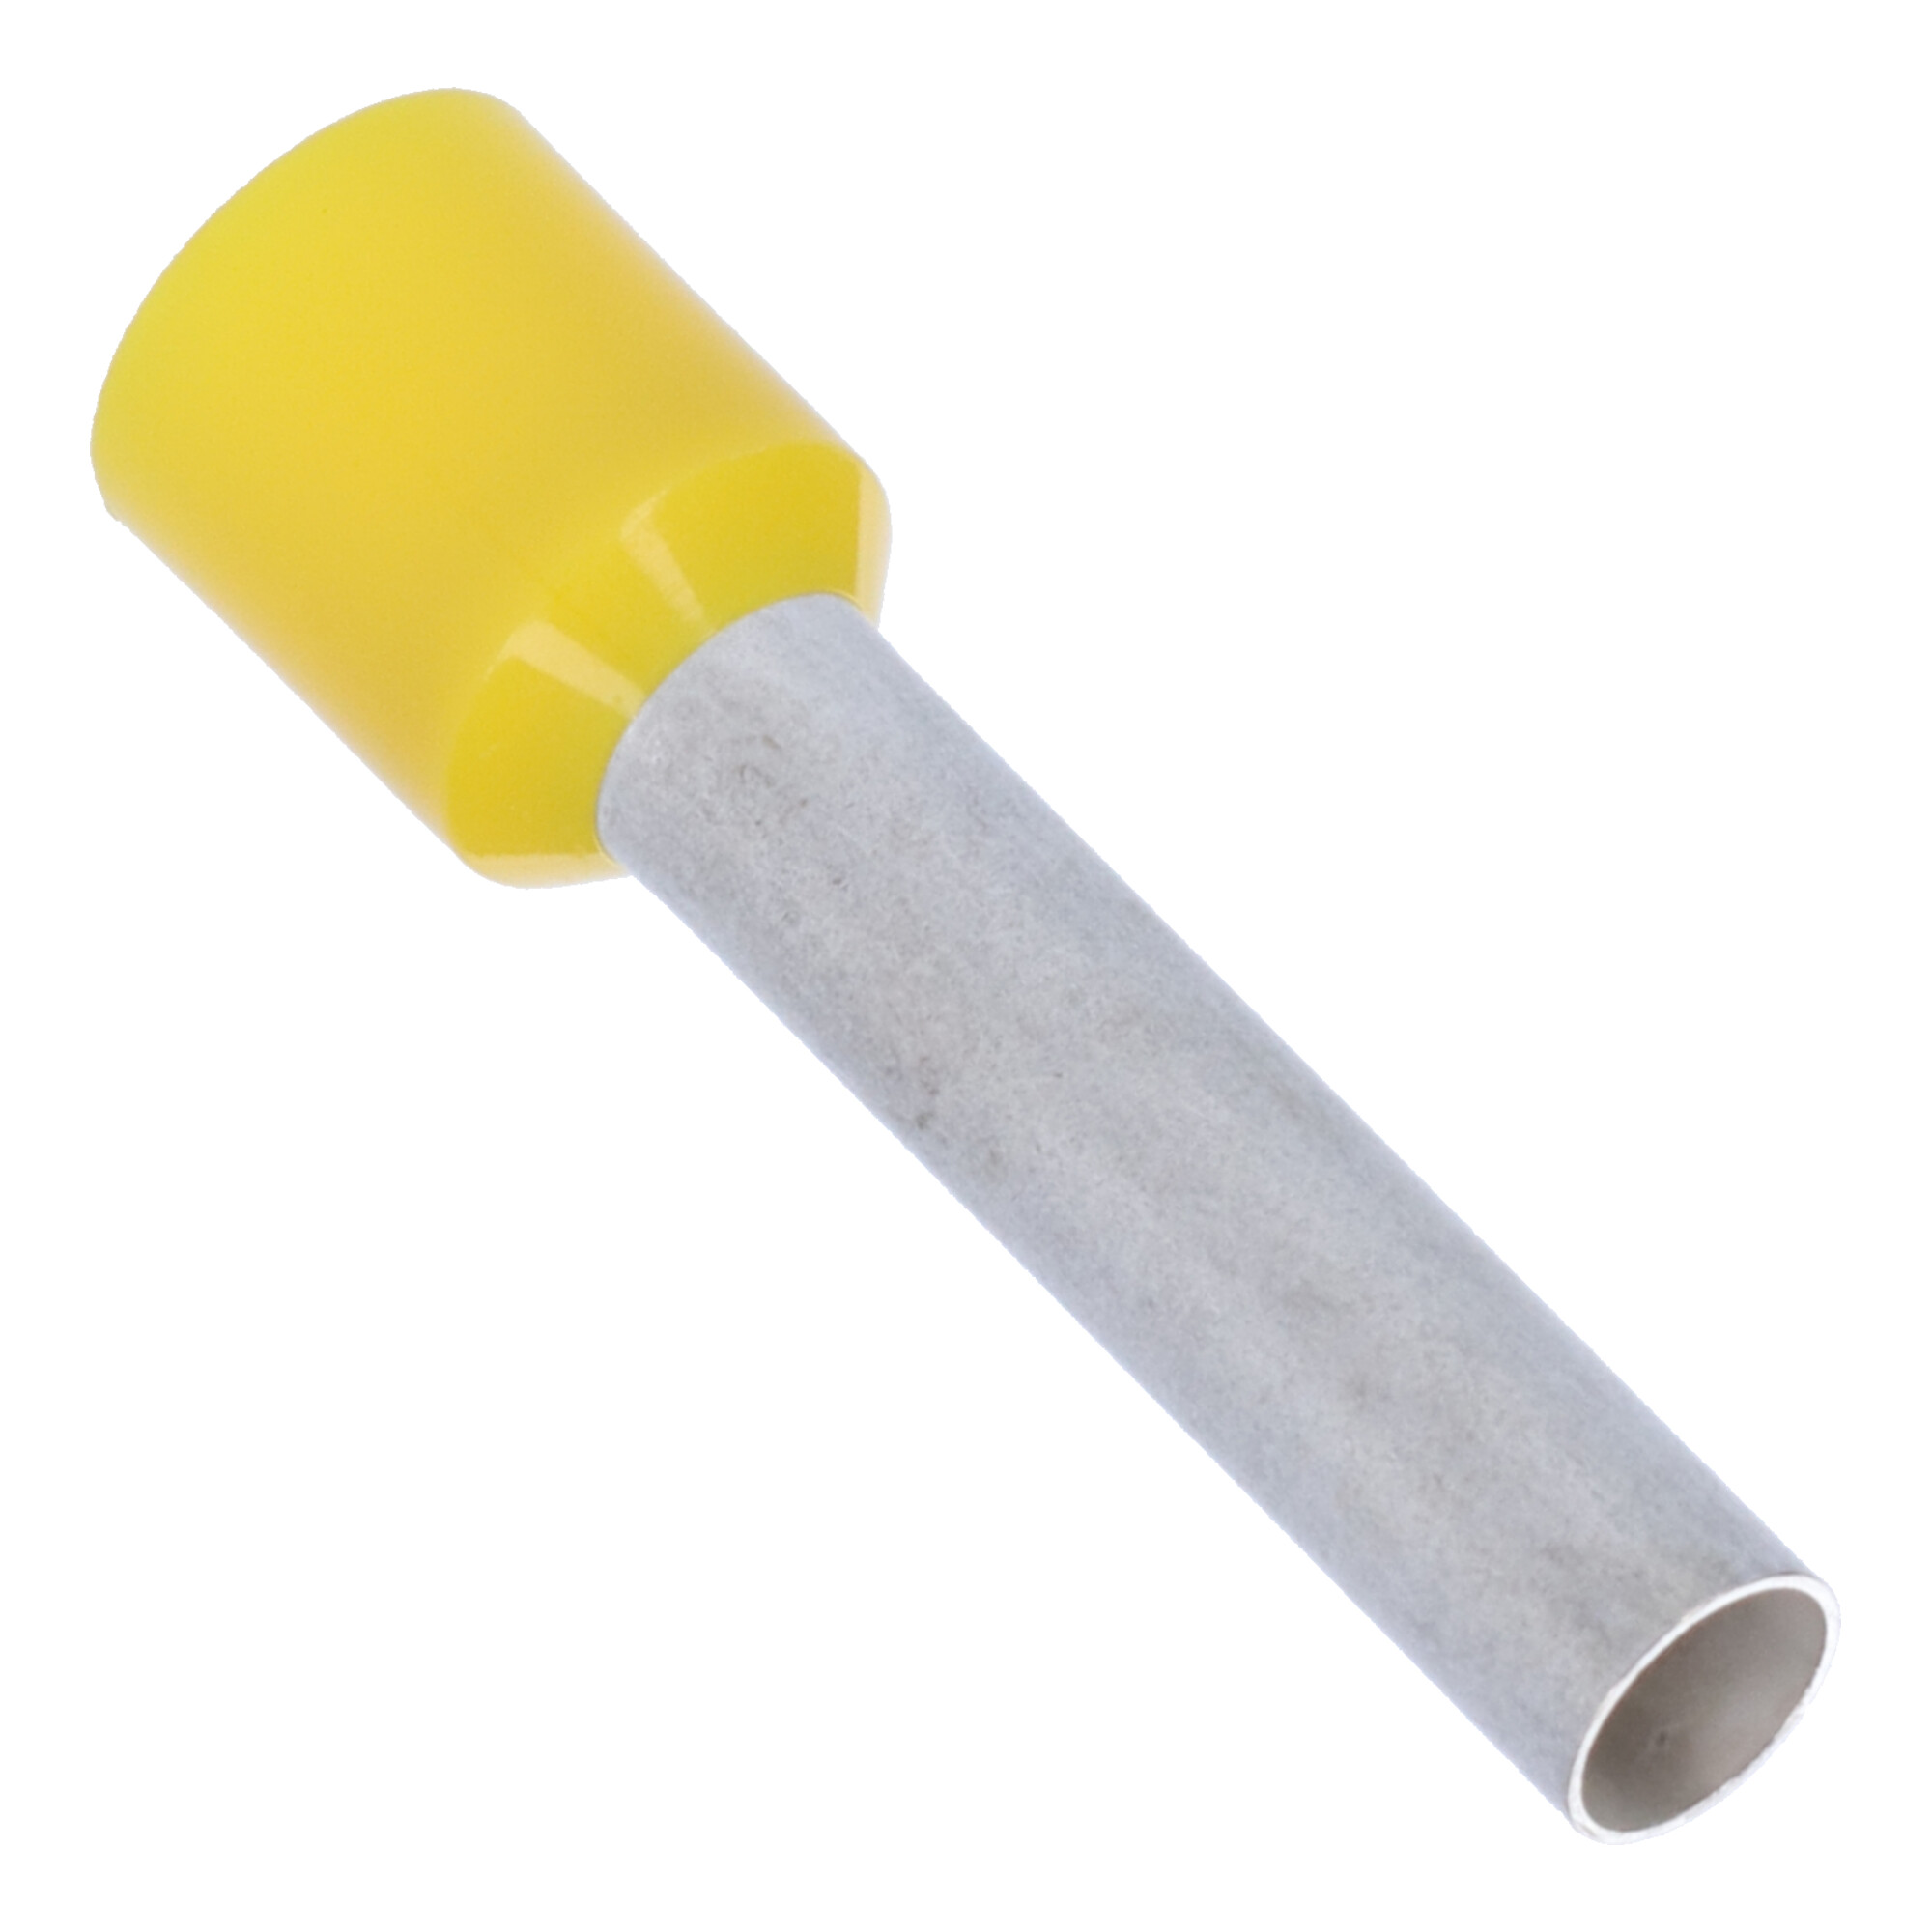 15-01087 Insulated wire end sleeve